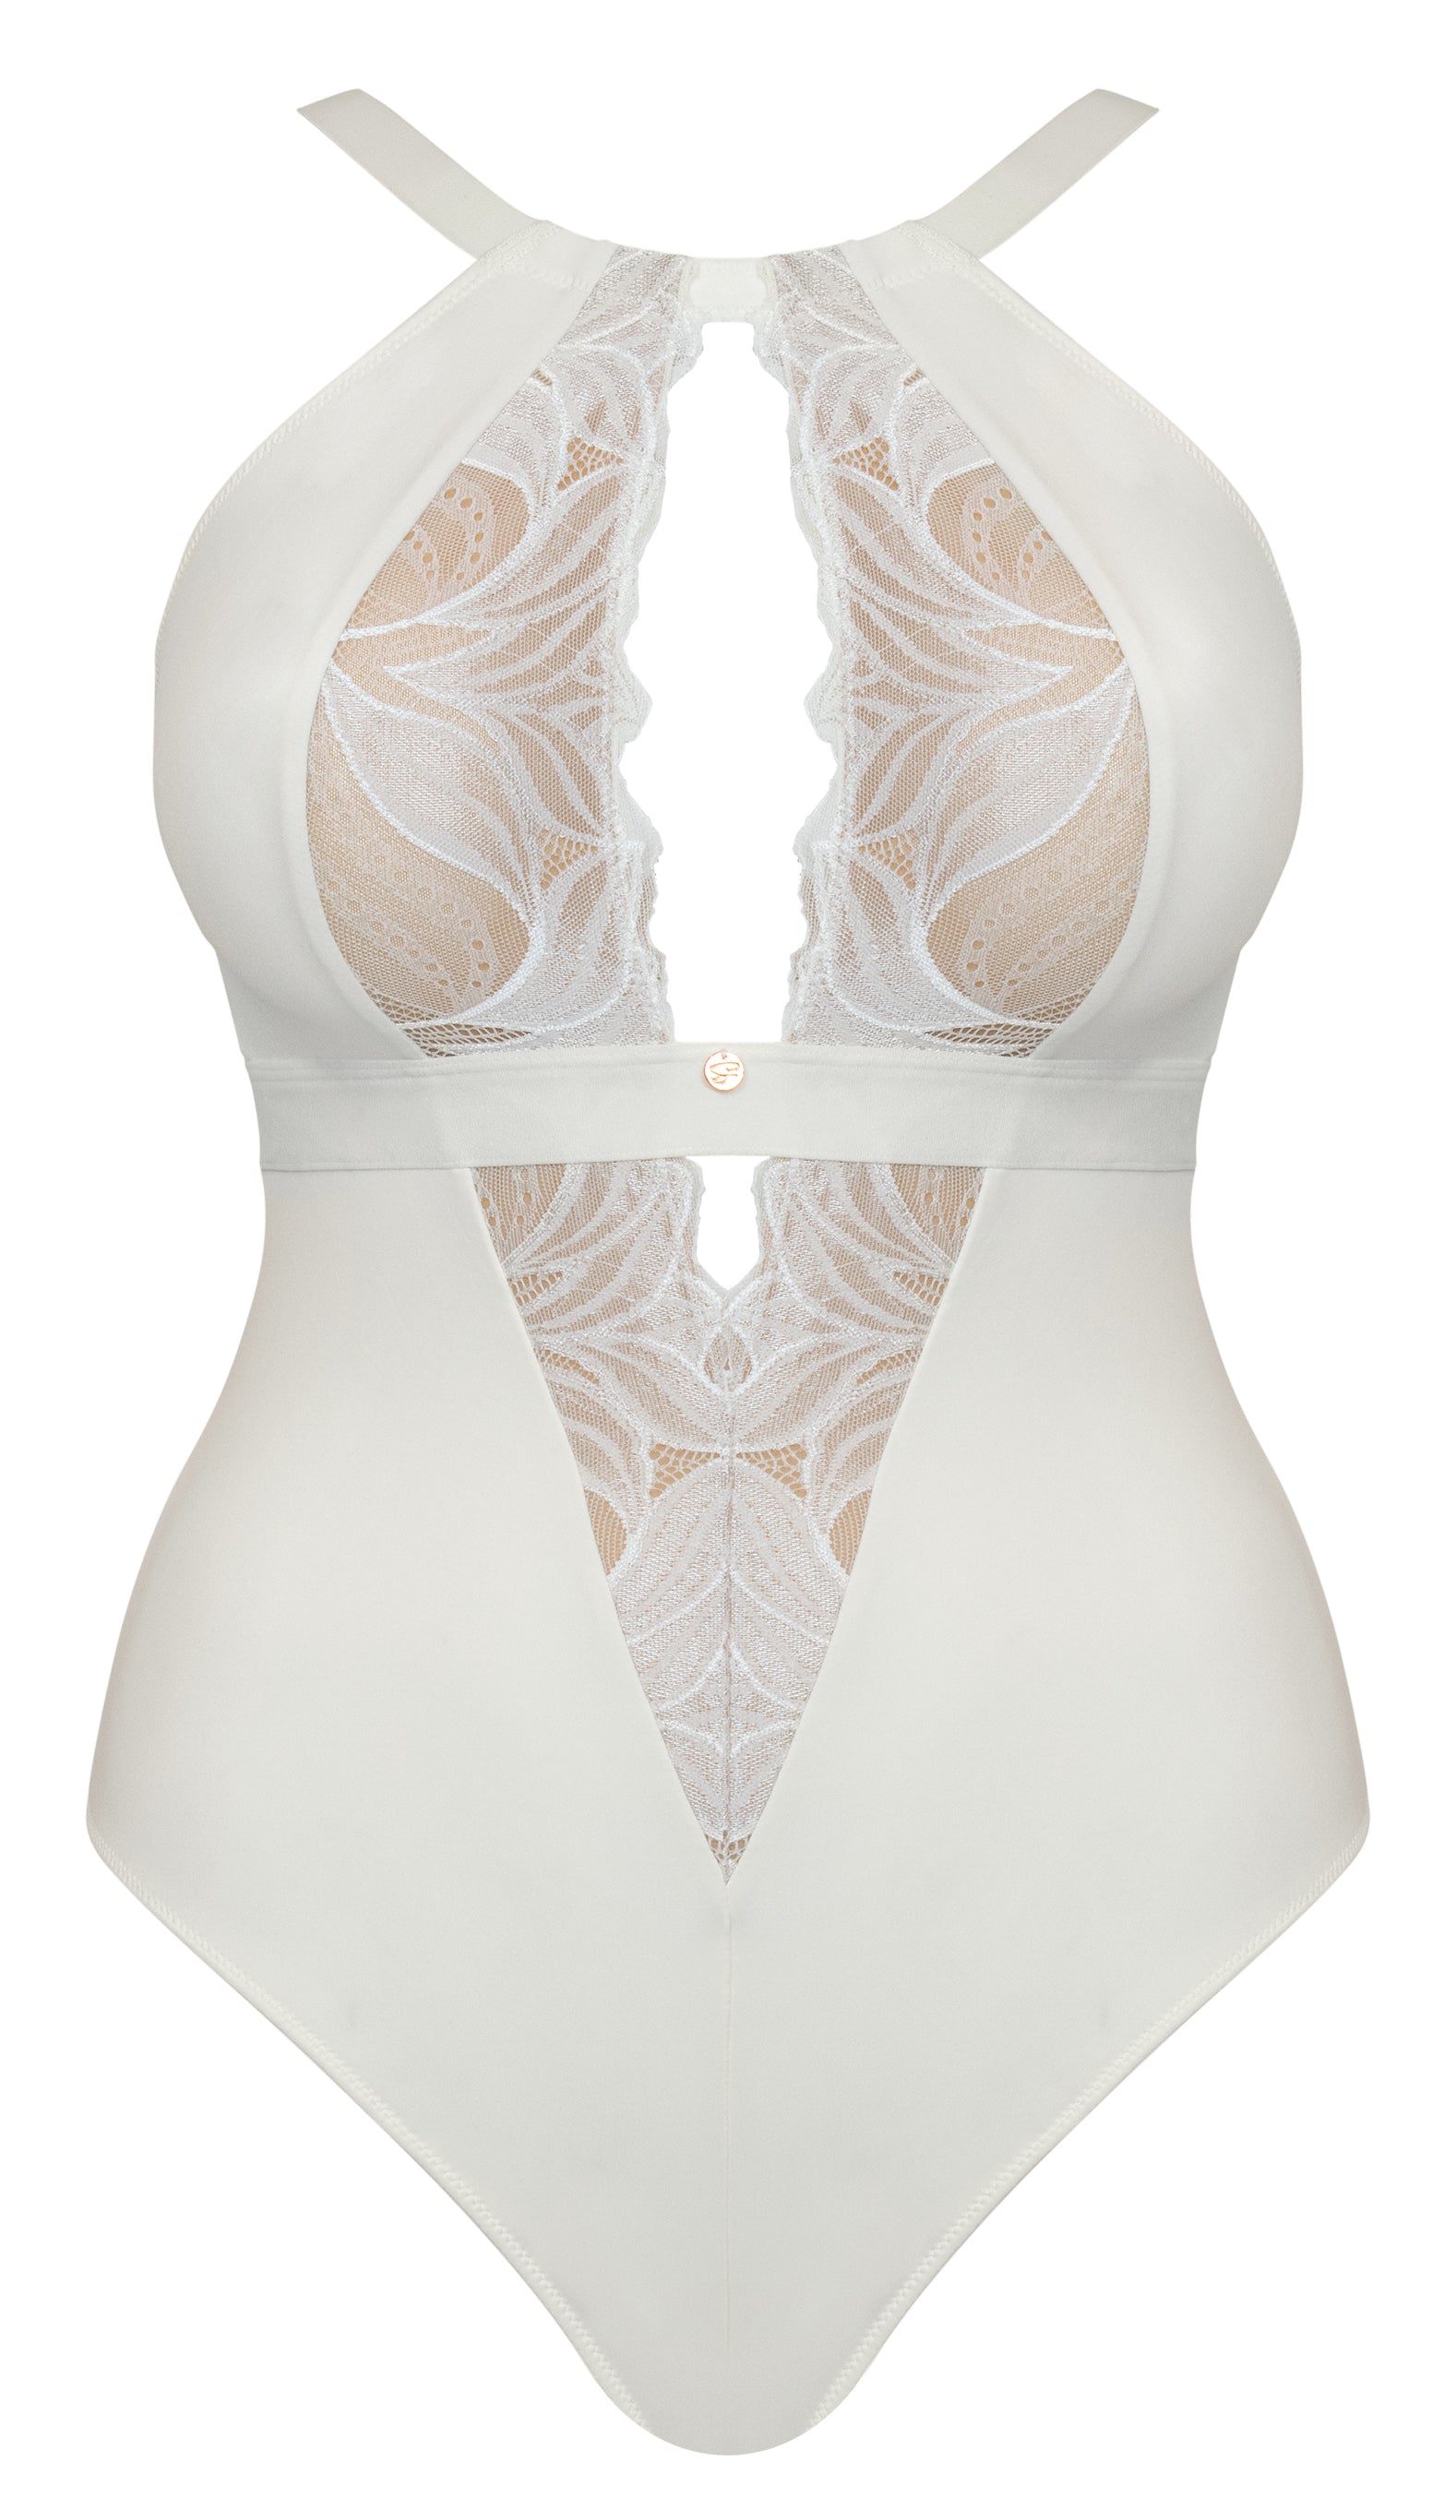 Scantilly by Curvy Kate Womens Indulgence Stretch Lace Bodysuit  Style-ST010704 